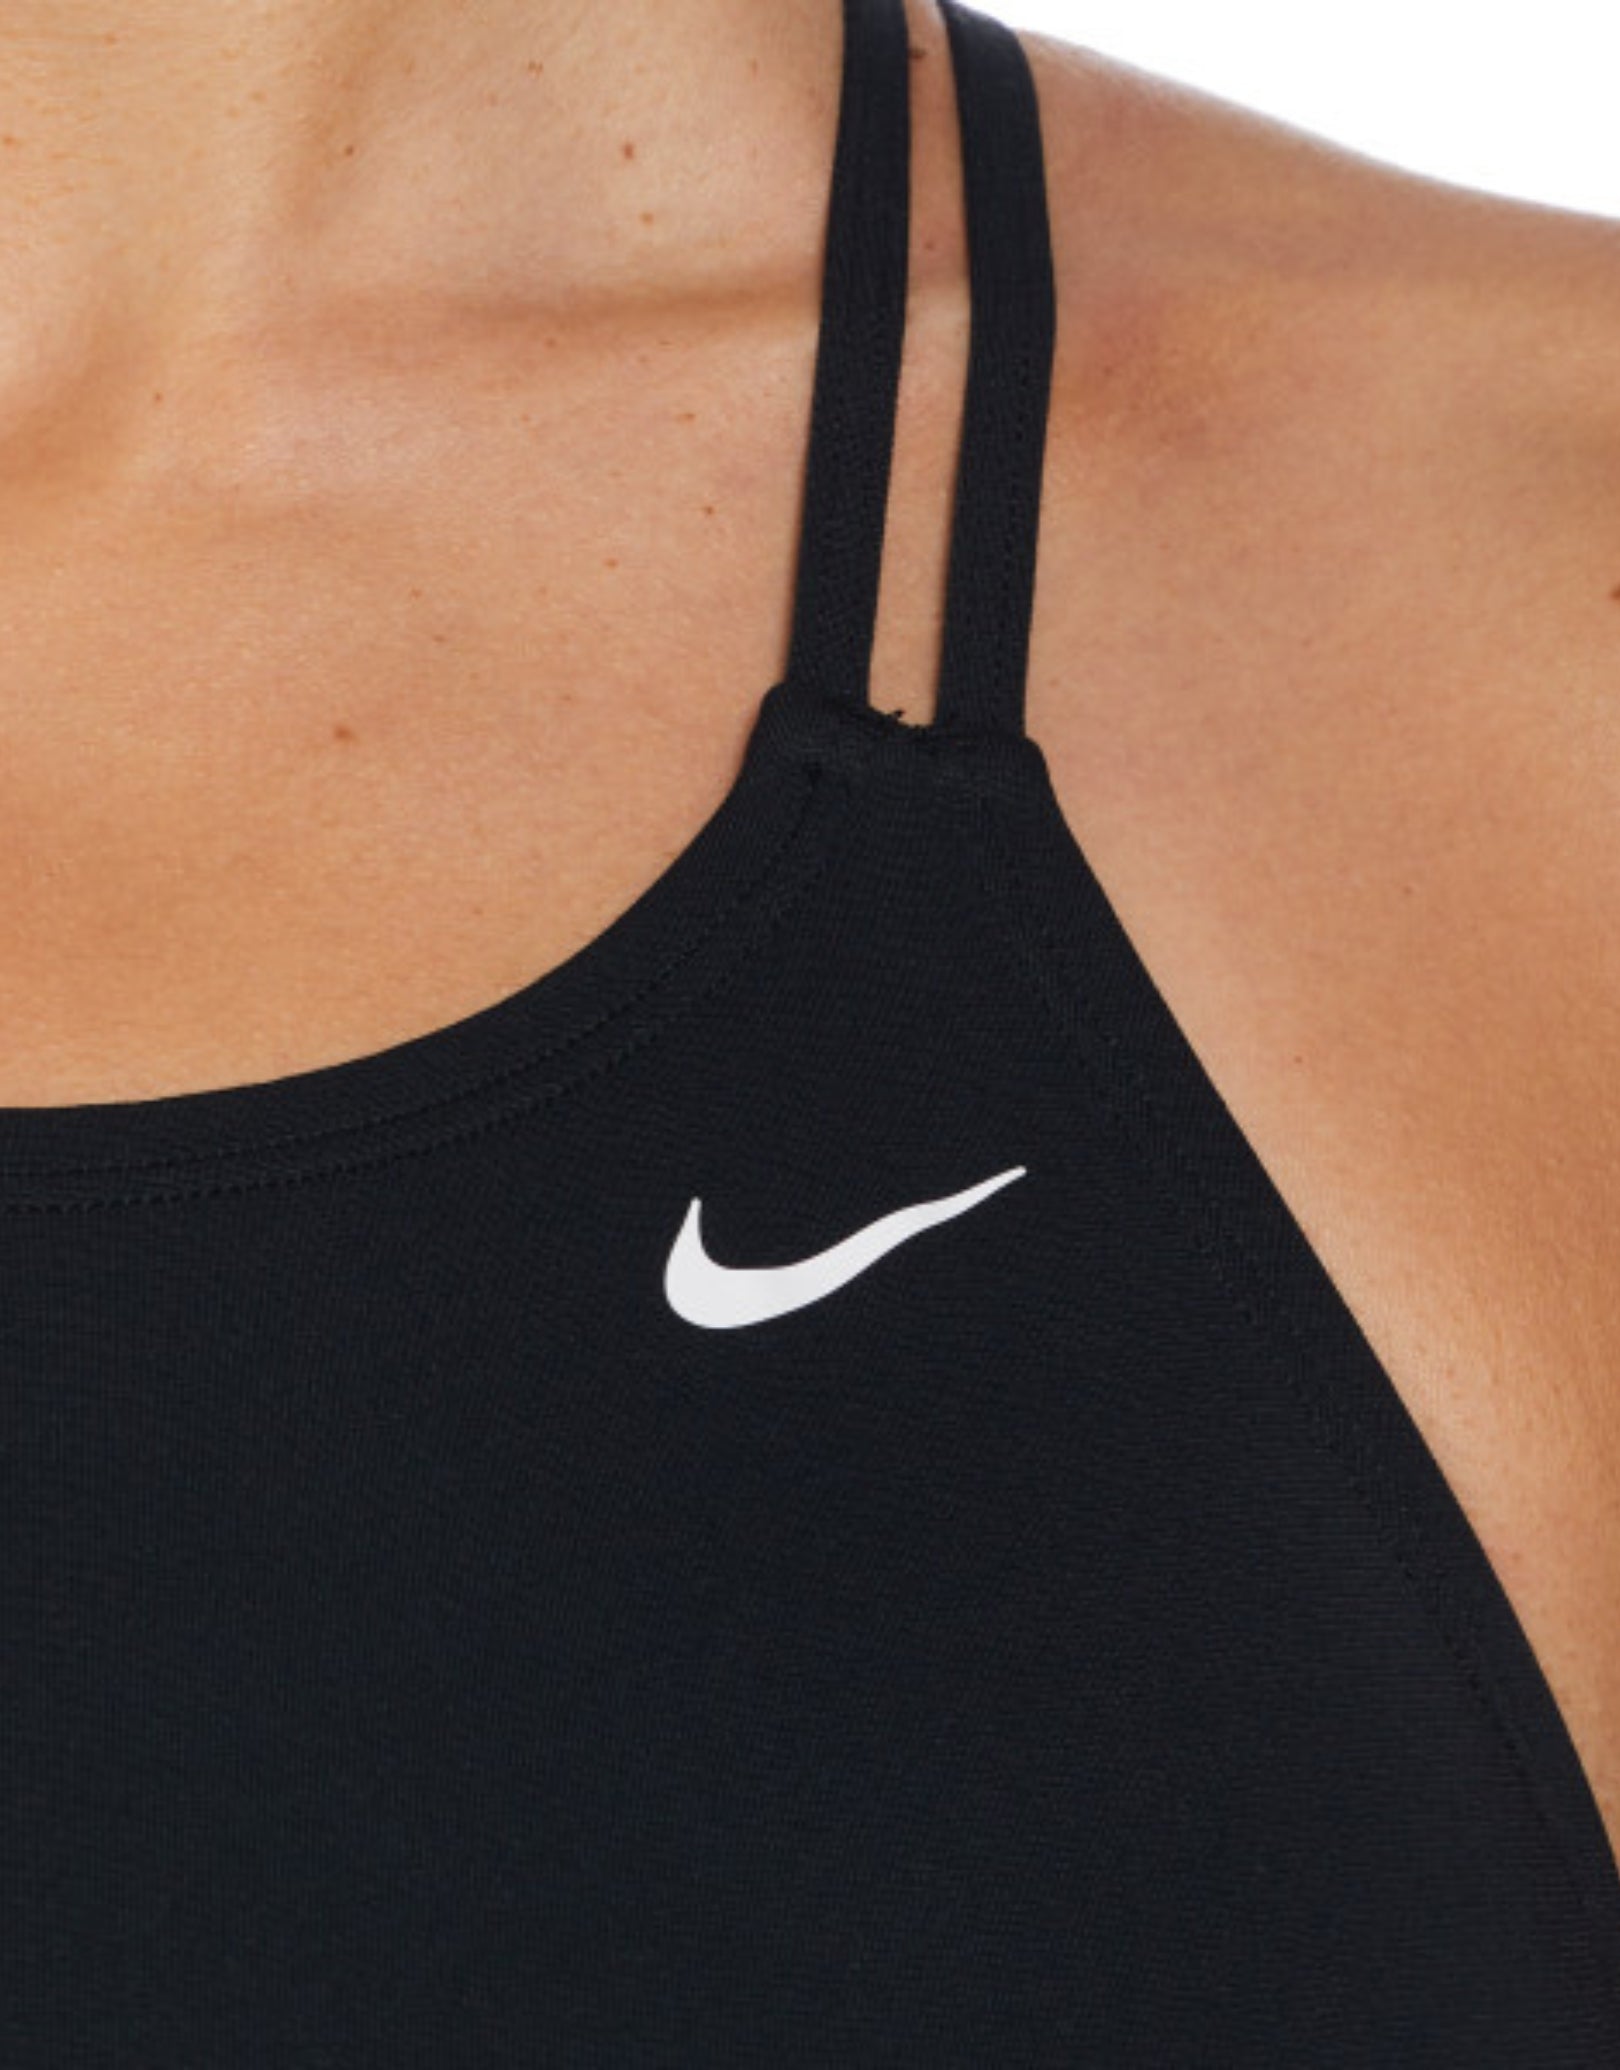 Nike Hydrastrong Solid Spiderback Swimsuit - Black, Simply Swim